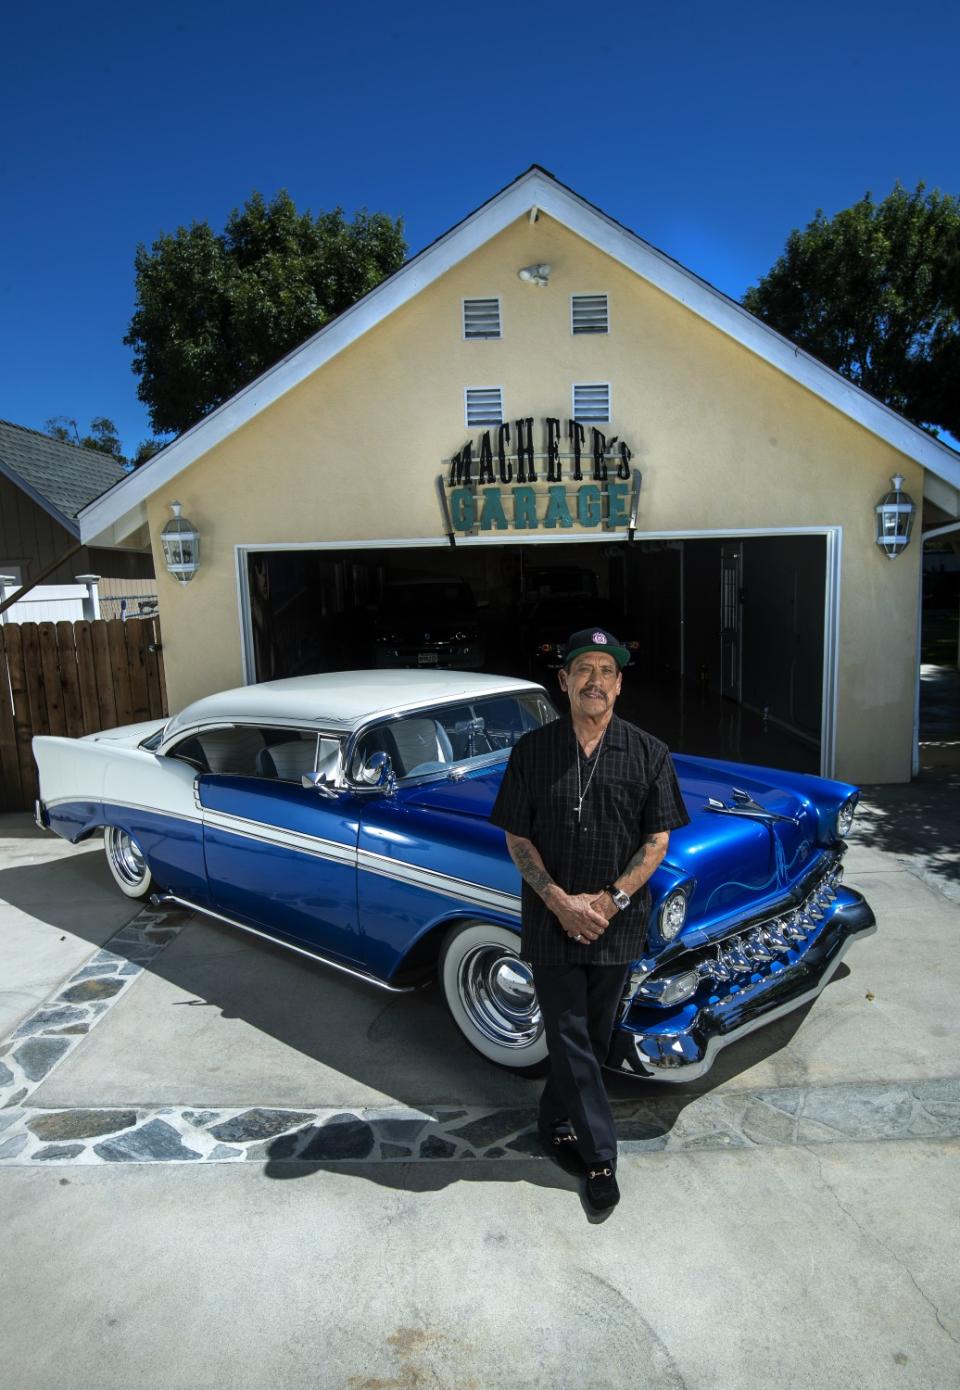 Danny Trejo in front of his 1956 blue and white car and a garage with the sign Machete's Garage